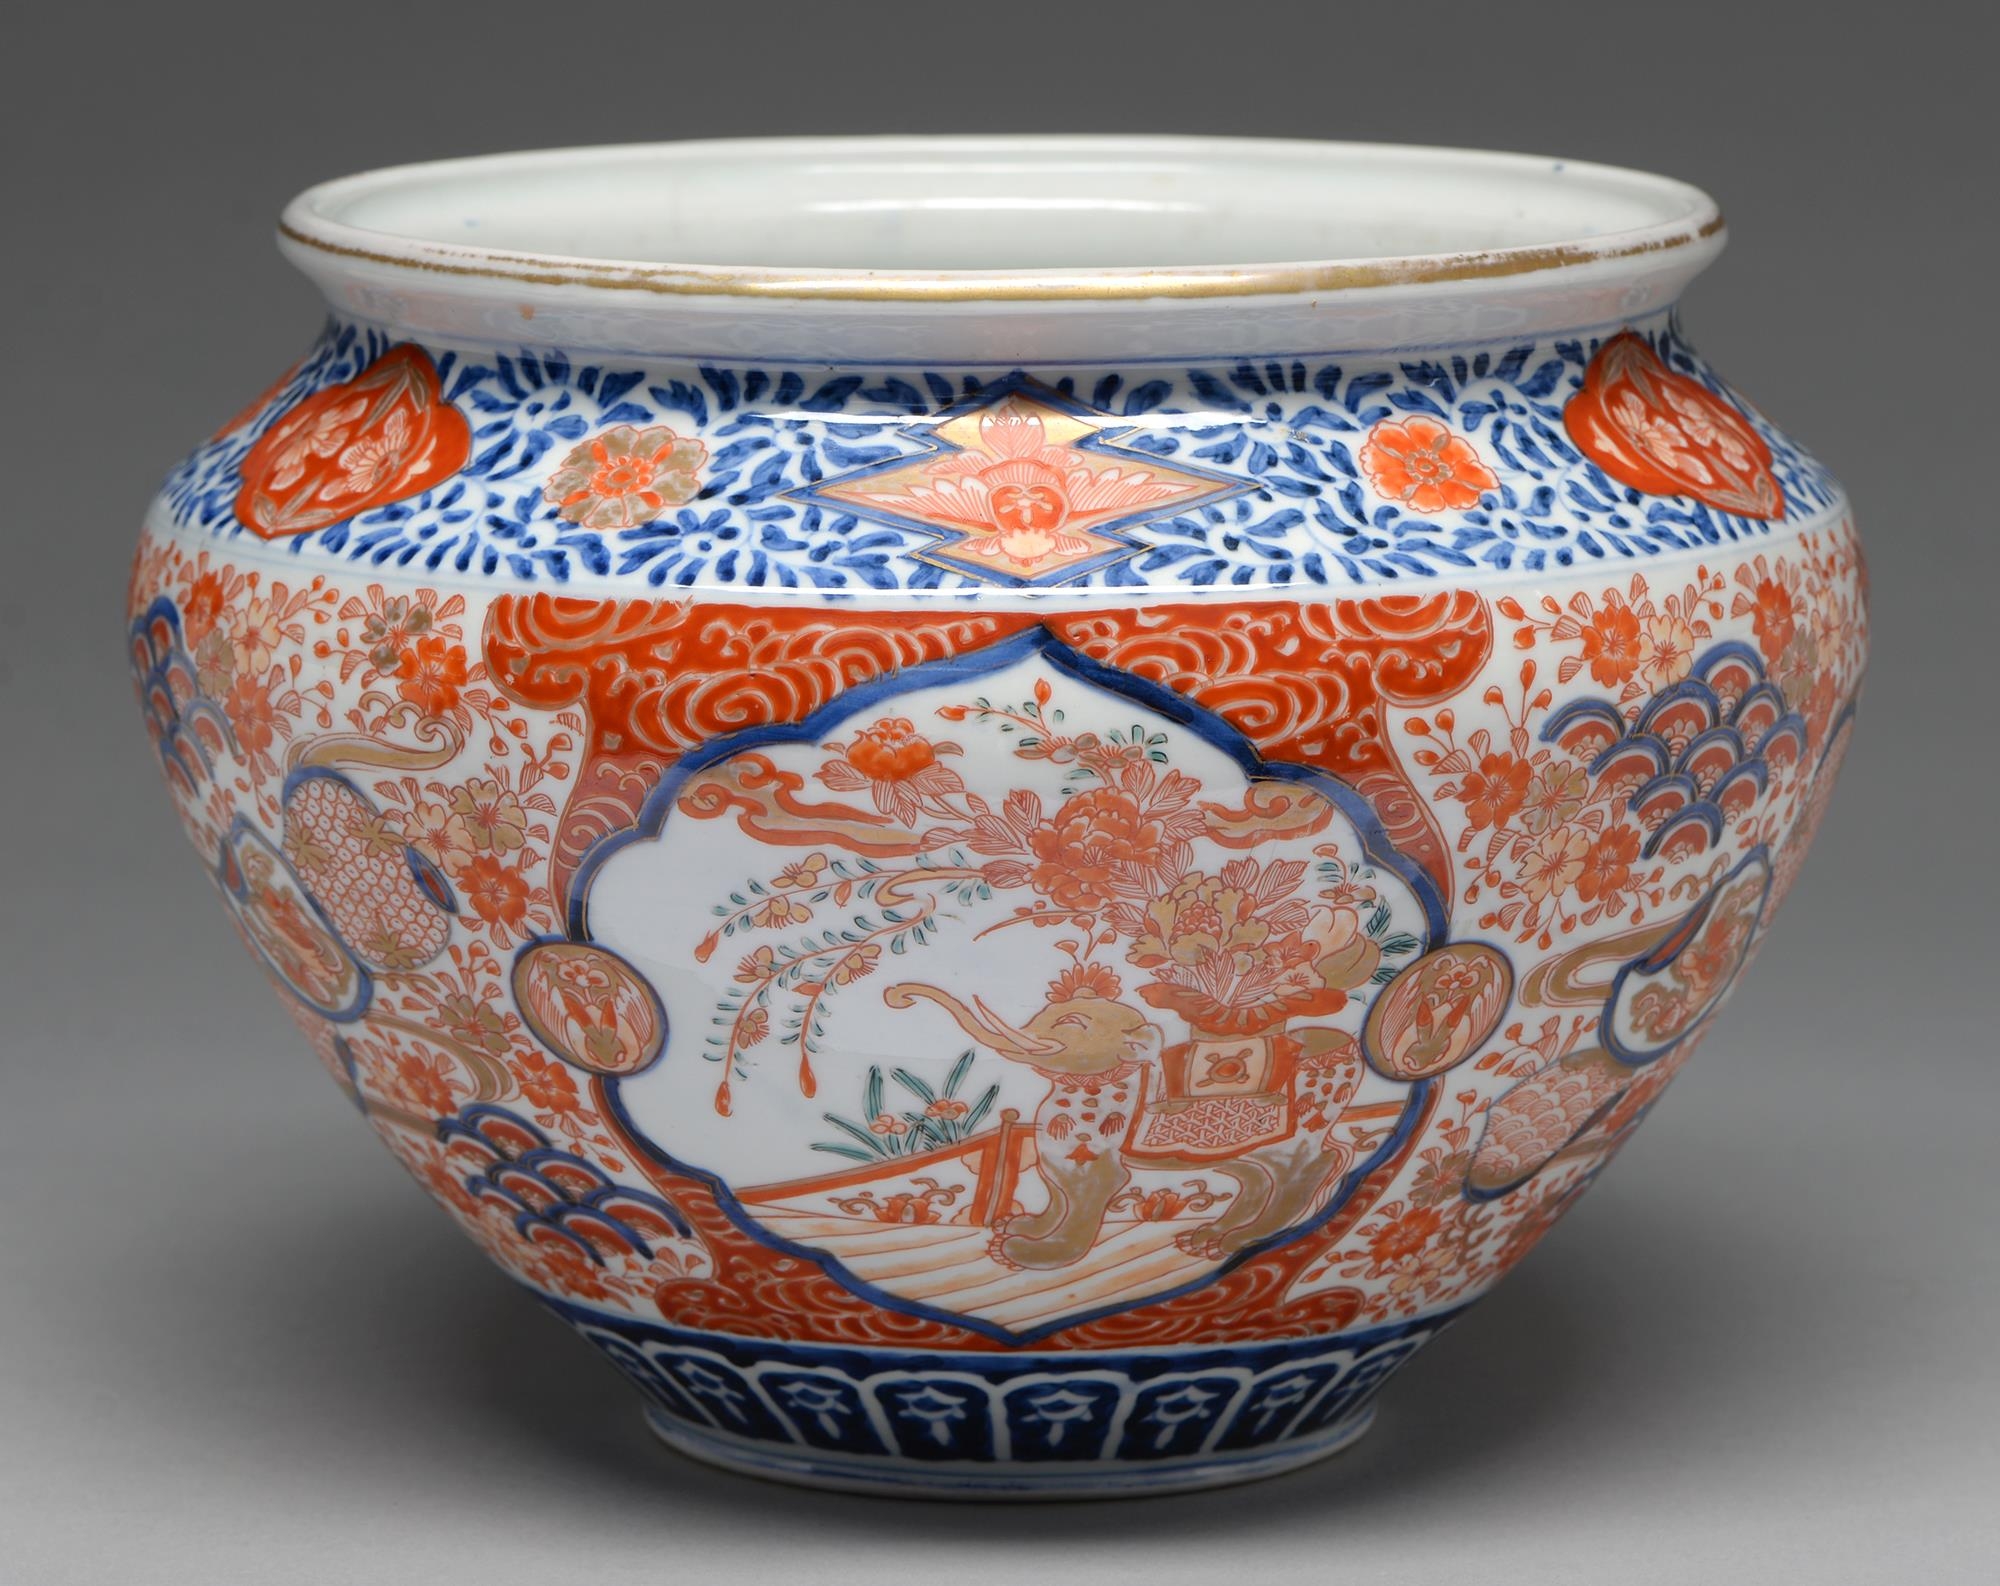 An Imari jardiniere, early 20th c, painted in underglaze blue and enamelled in red and gilt with a